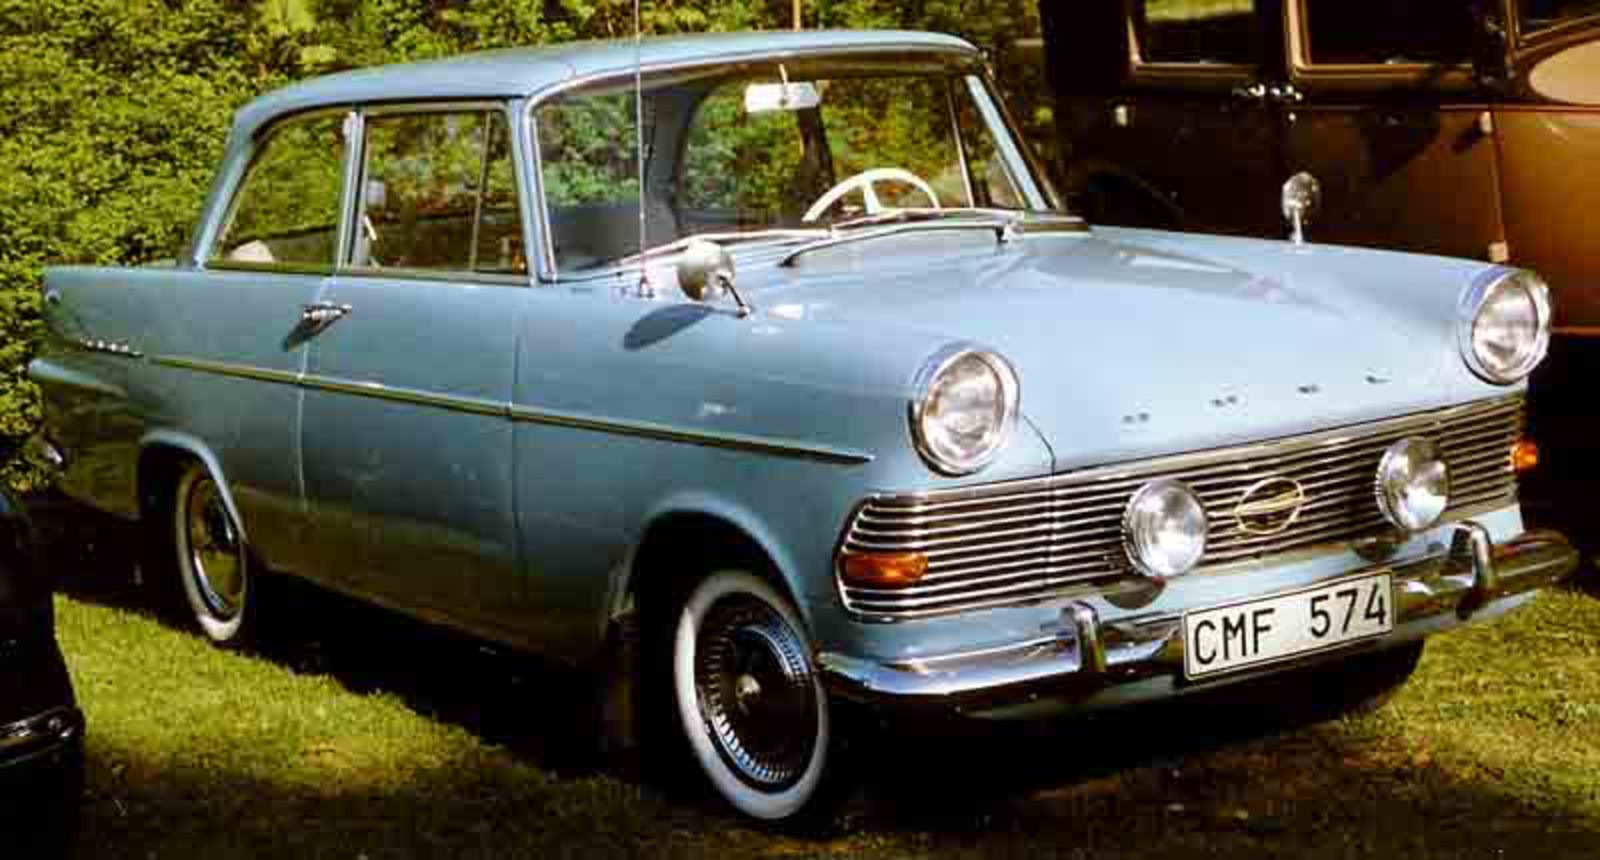 File:Opel Rekord 1700 1962.jpg. No higher resolution available.